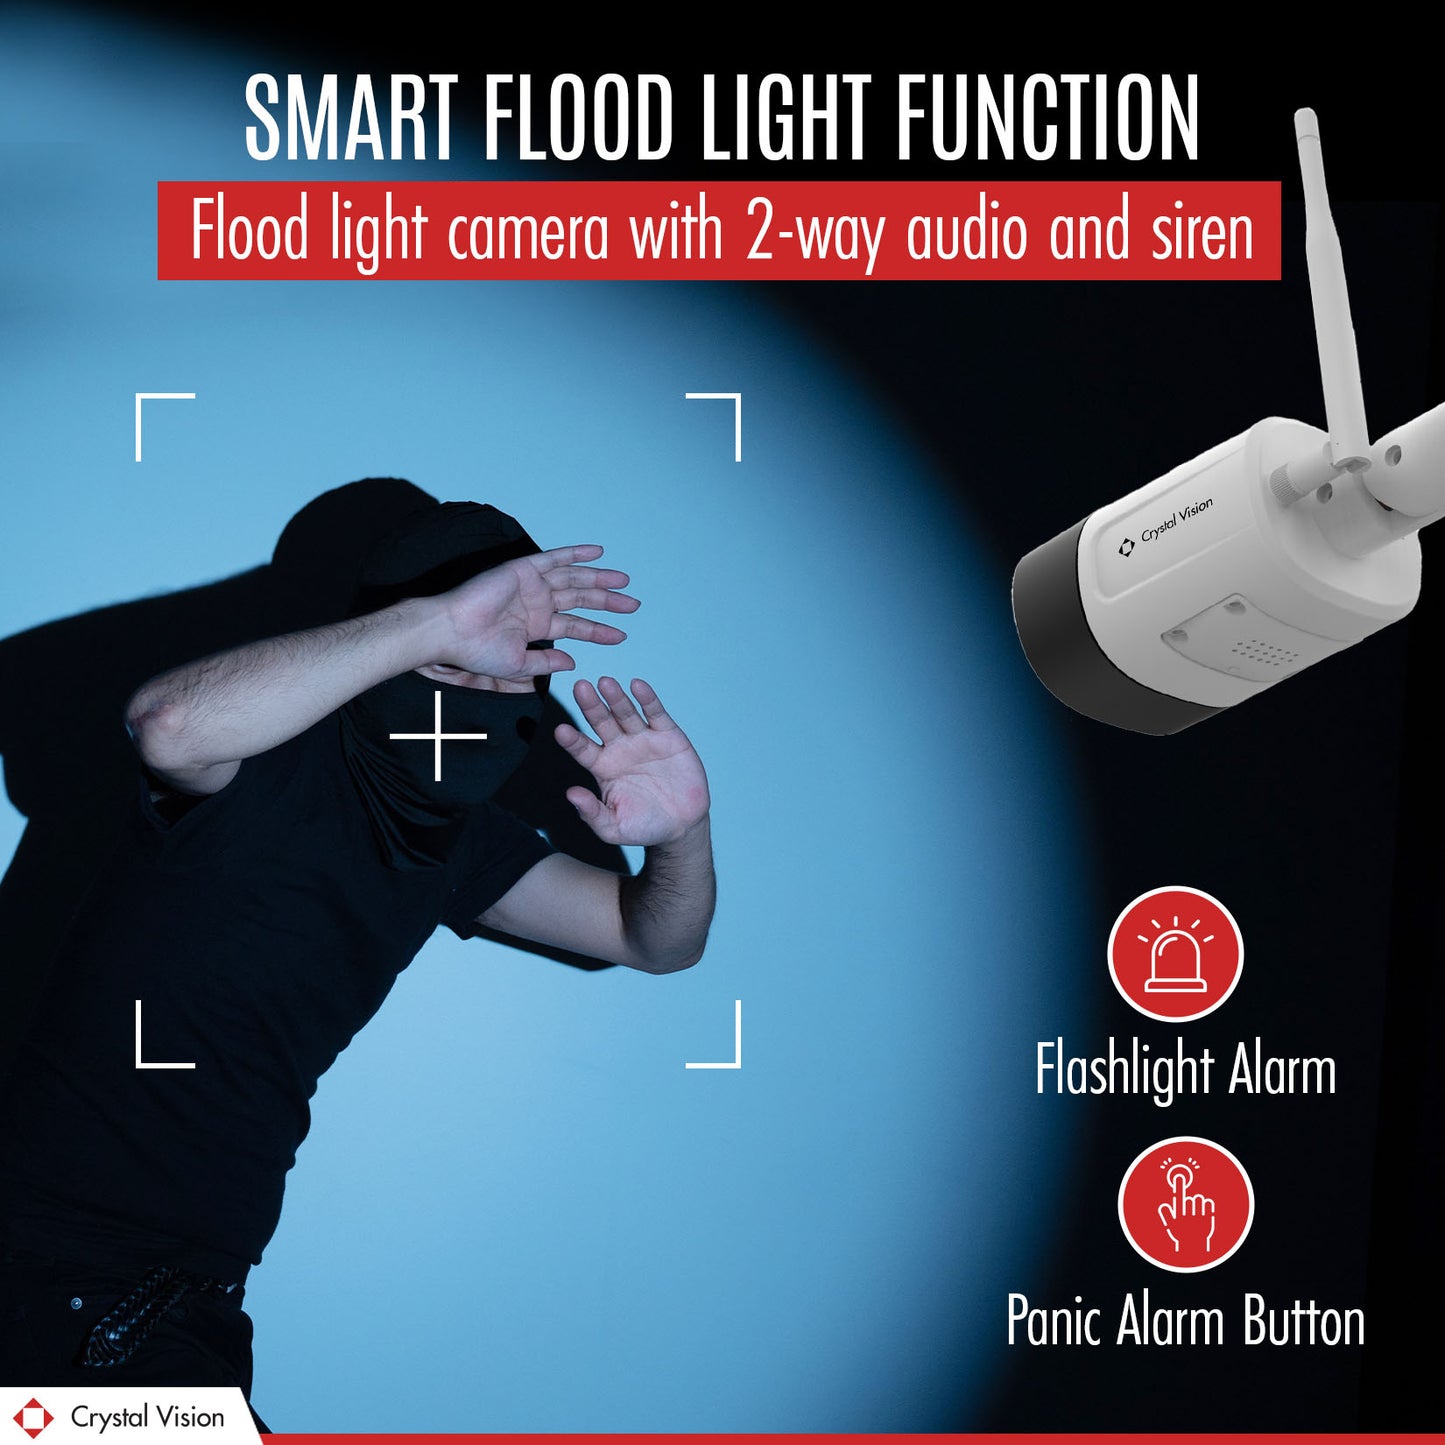 Advertisement for Crystal Vision's 'SMART FLOOD LIGHT FUNCTION' showcasing a flood light camera with 2-way audio and siren, a burglar recoiling in the light, accompanied by icons for 'Flashlight Alarm' and 'Panic Alarm Button